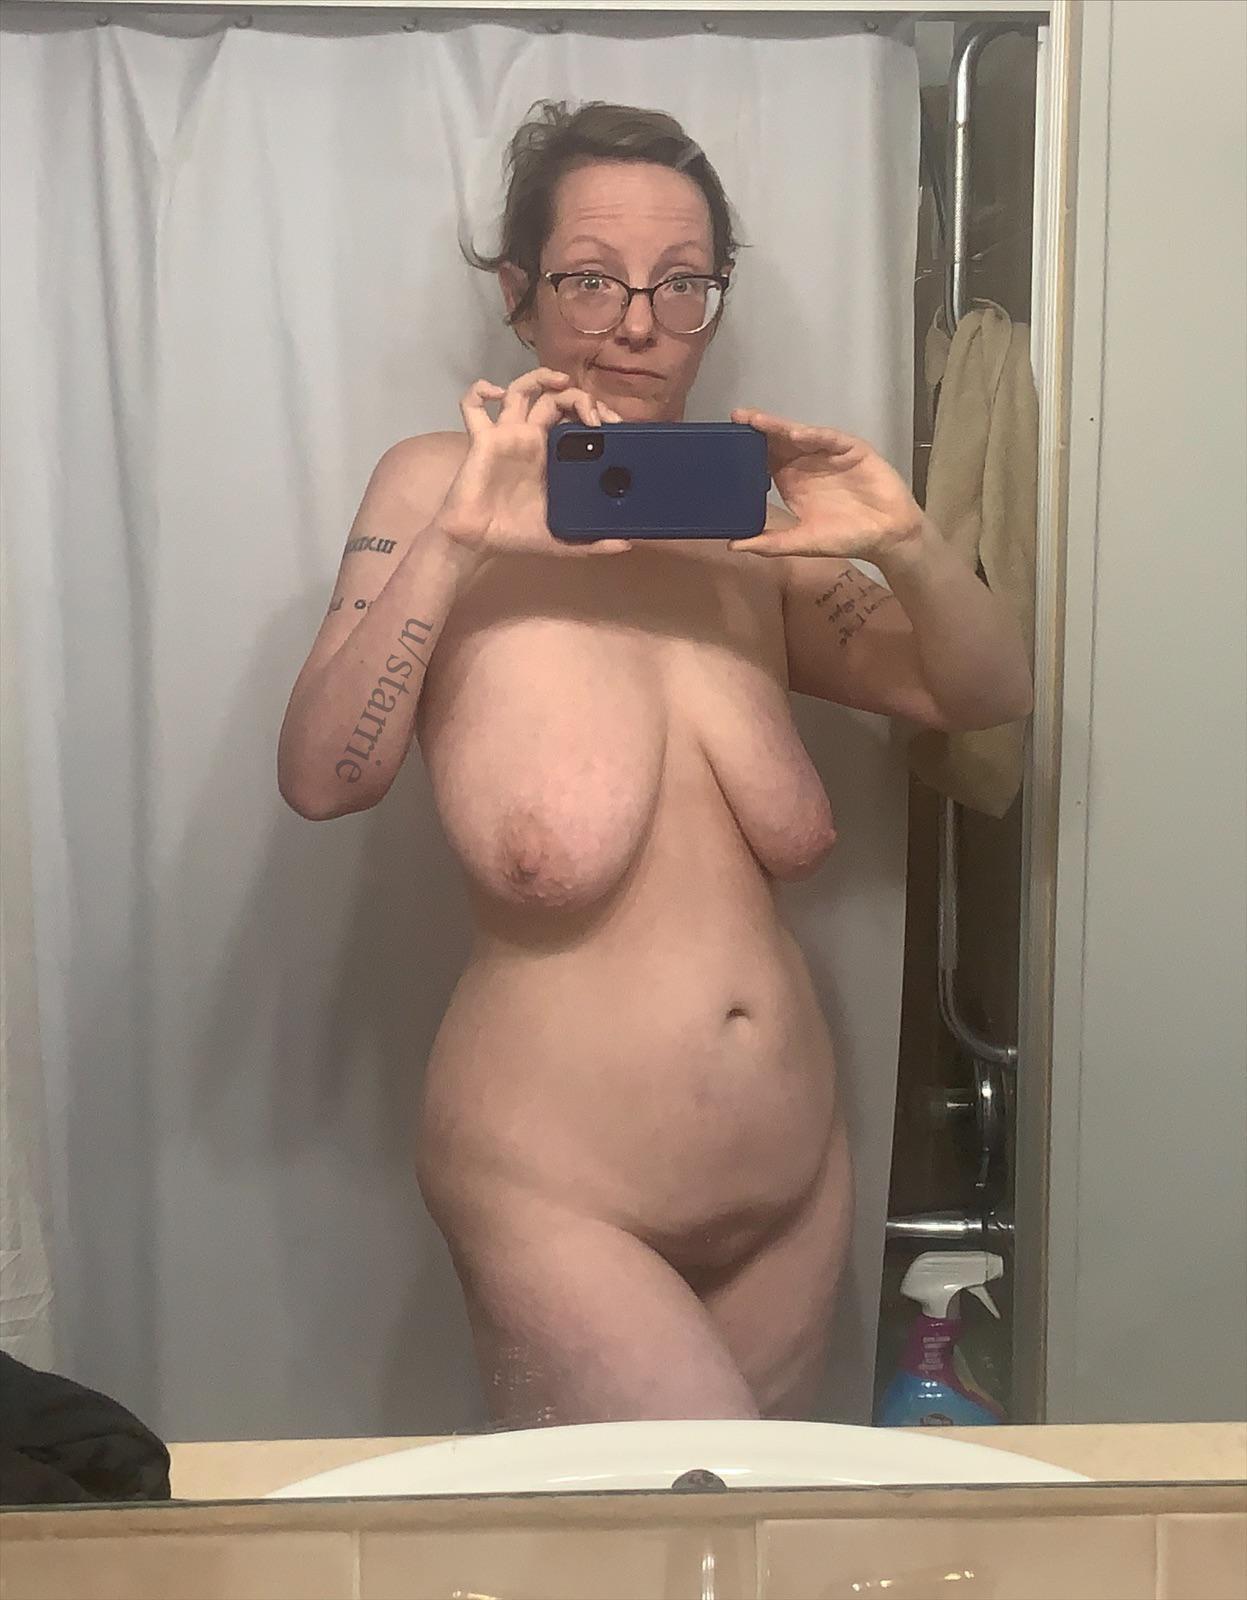 Bbwpictures -  Lost weight but kept the curves.